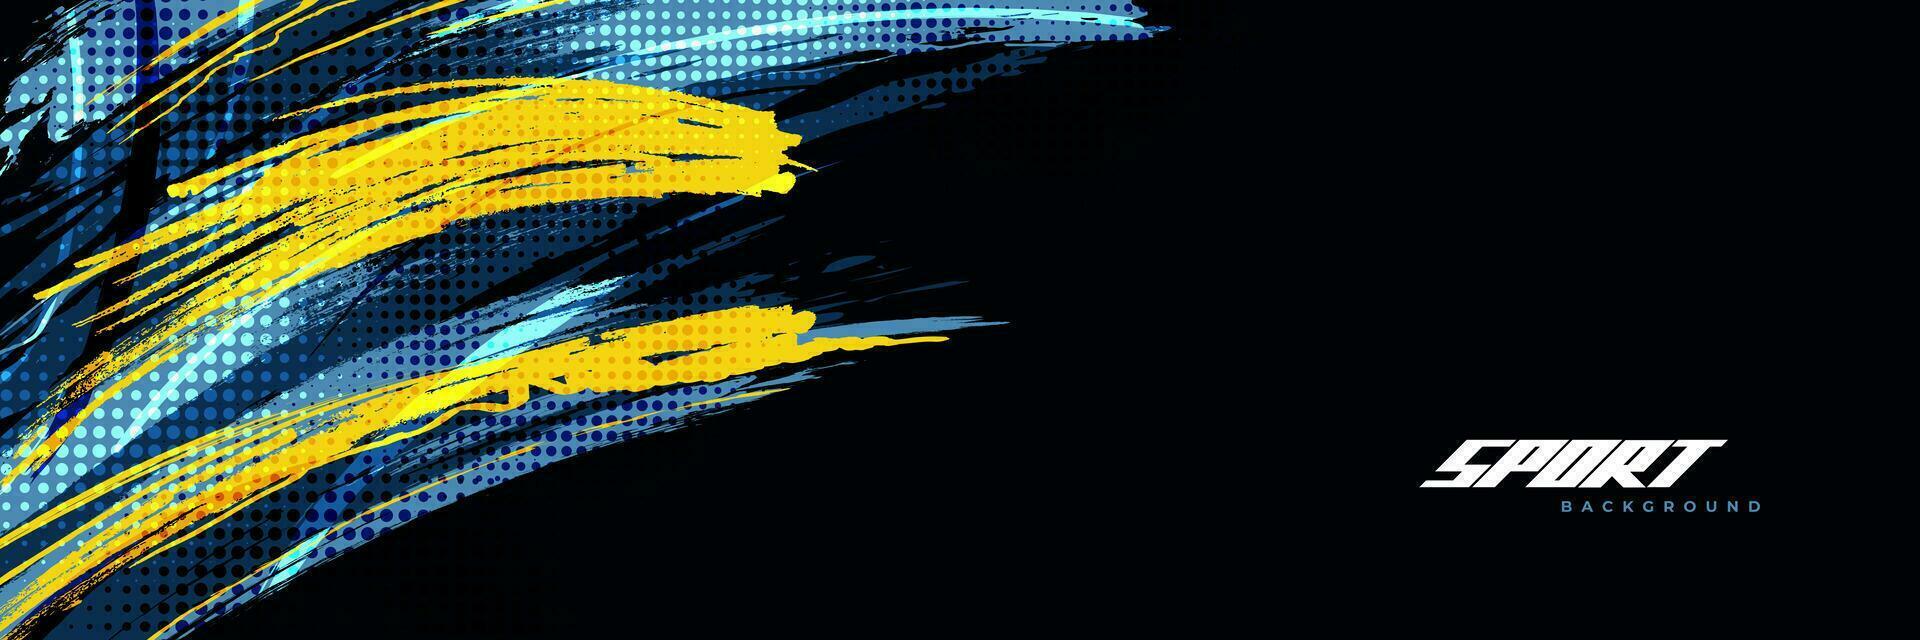 Abstract Brush Background Dominated by Blue and Yellow Color with Halftone Effect. Brush Stroke Illustration for Banner, Poster, or Sports Background. Scratch and Texture Elements For Design vector